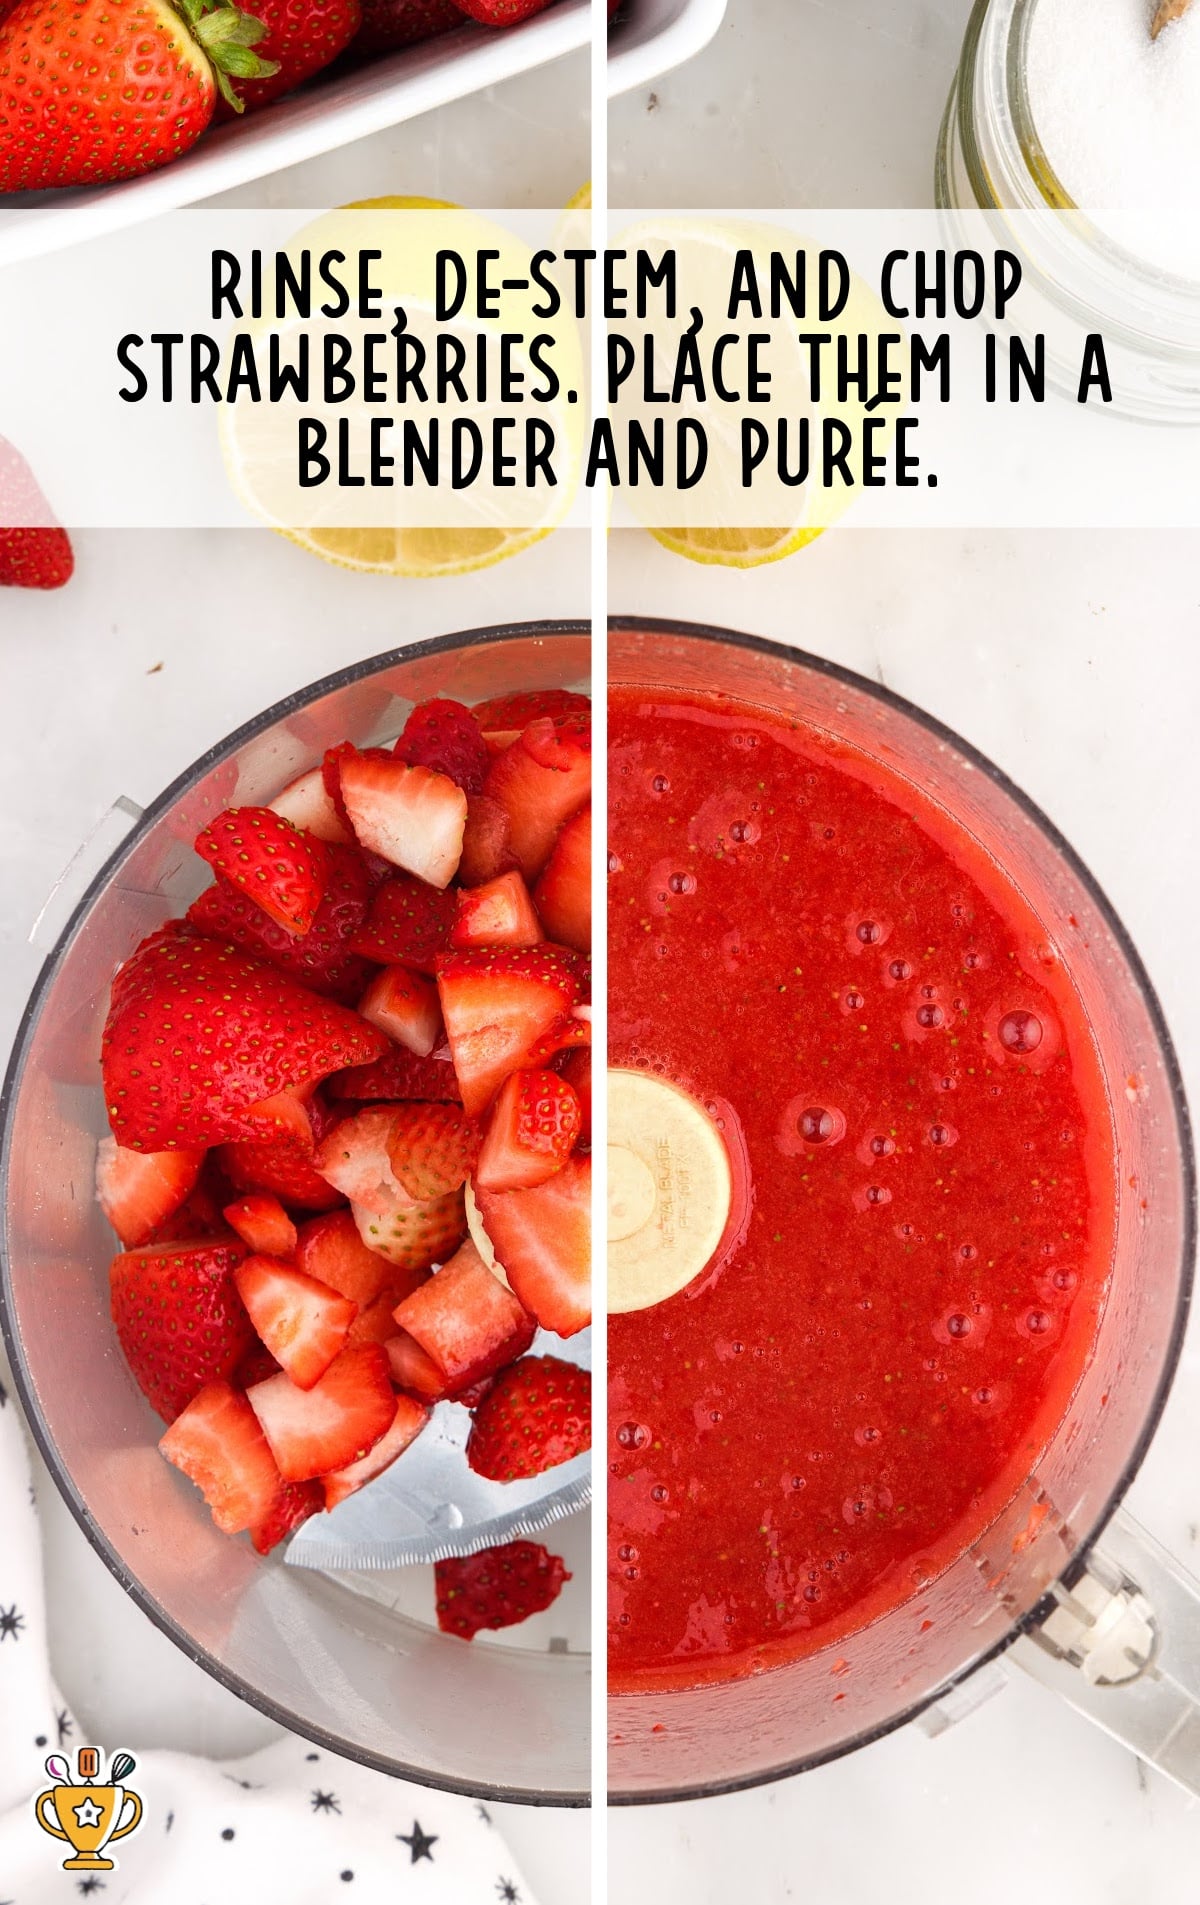 rinse and chop strawberries and place in a blender